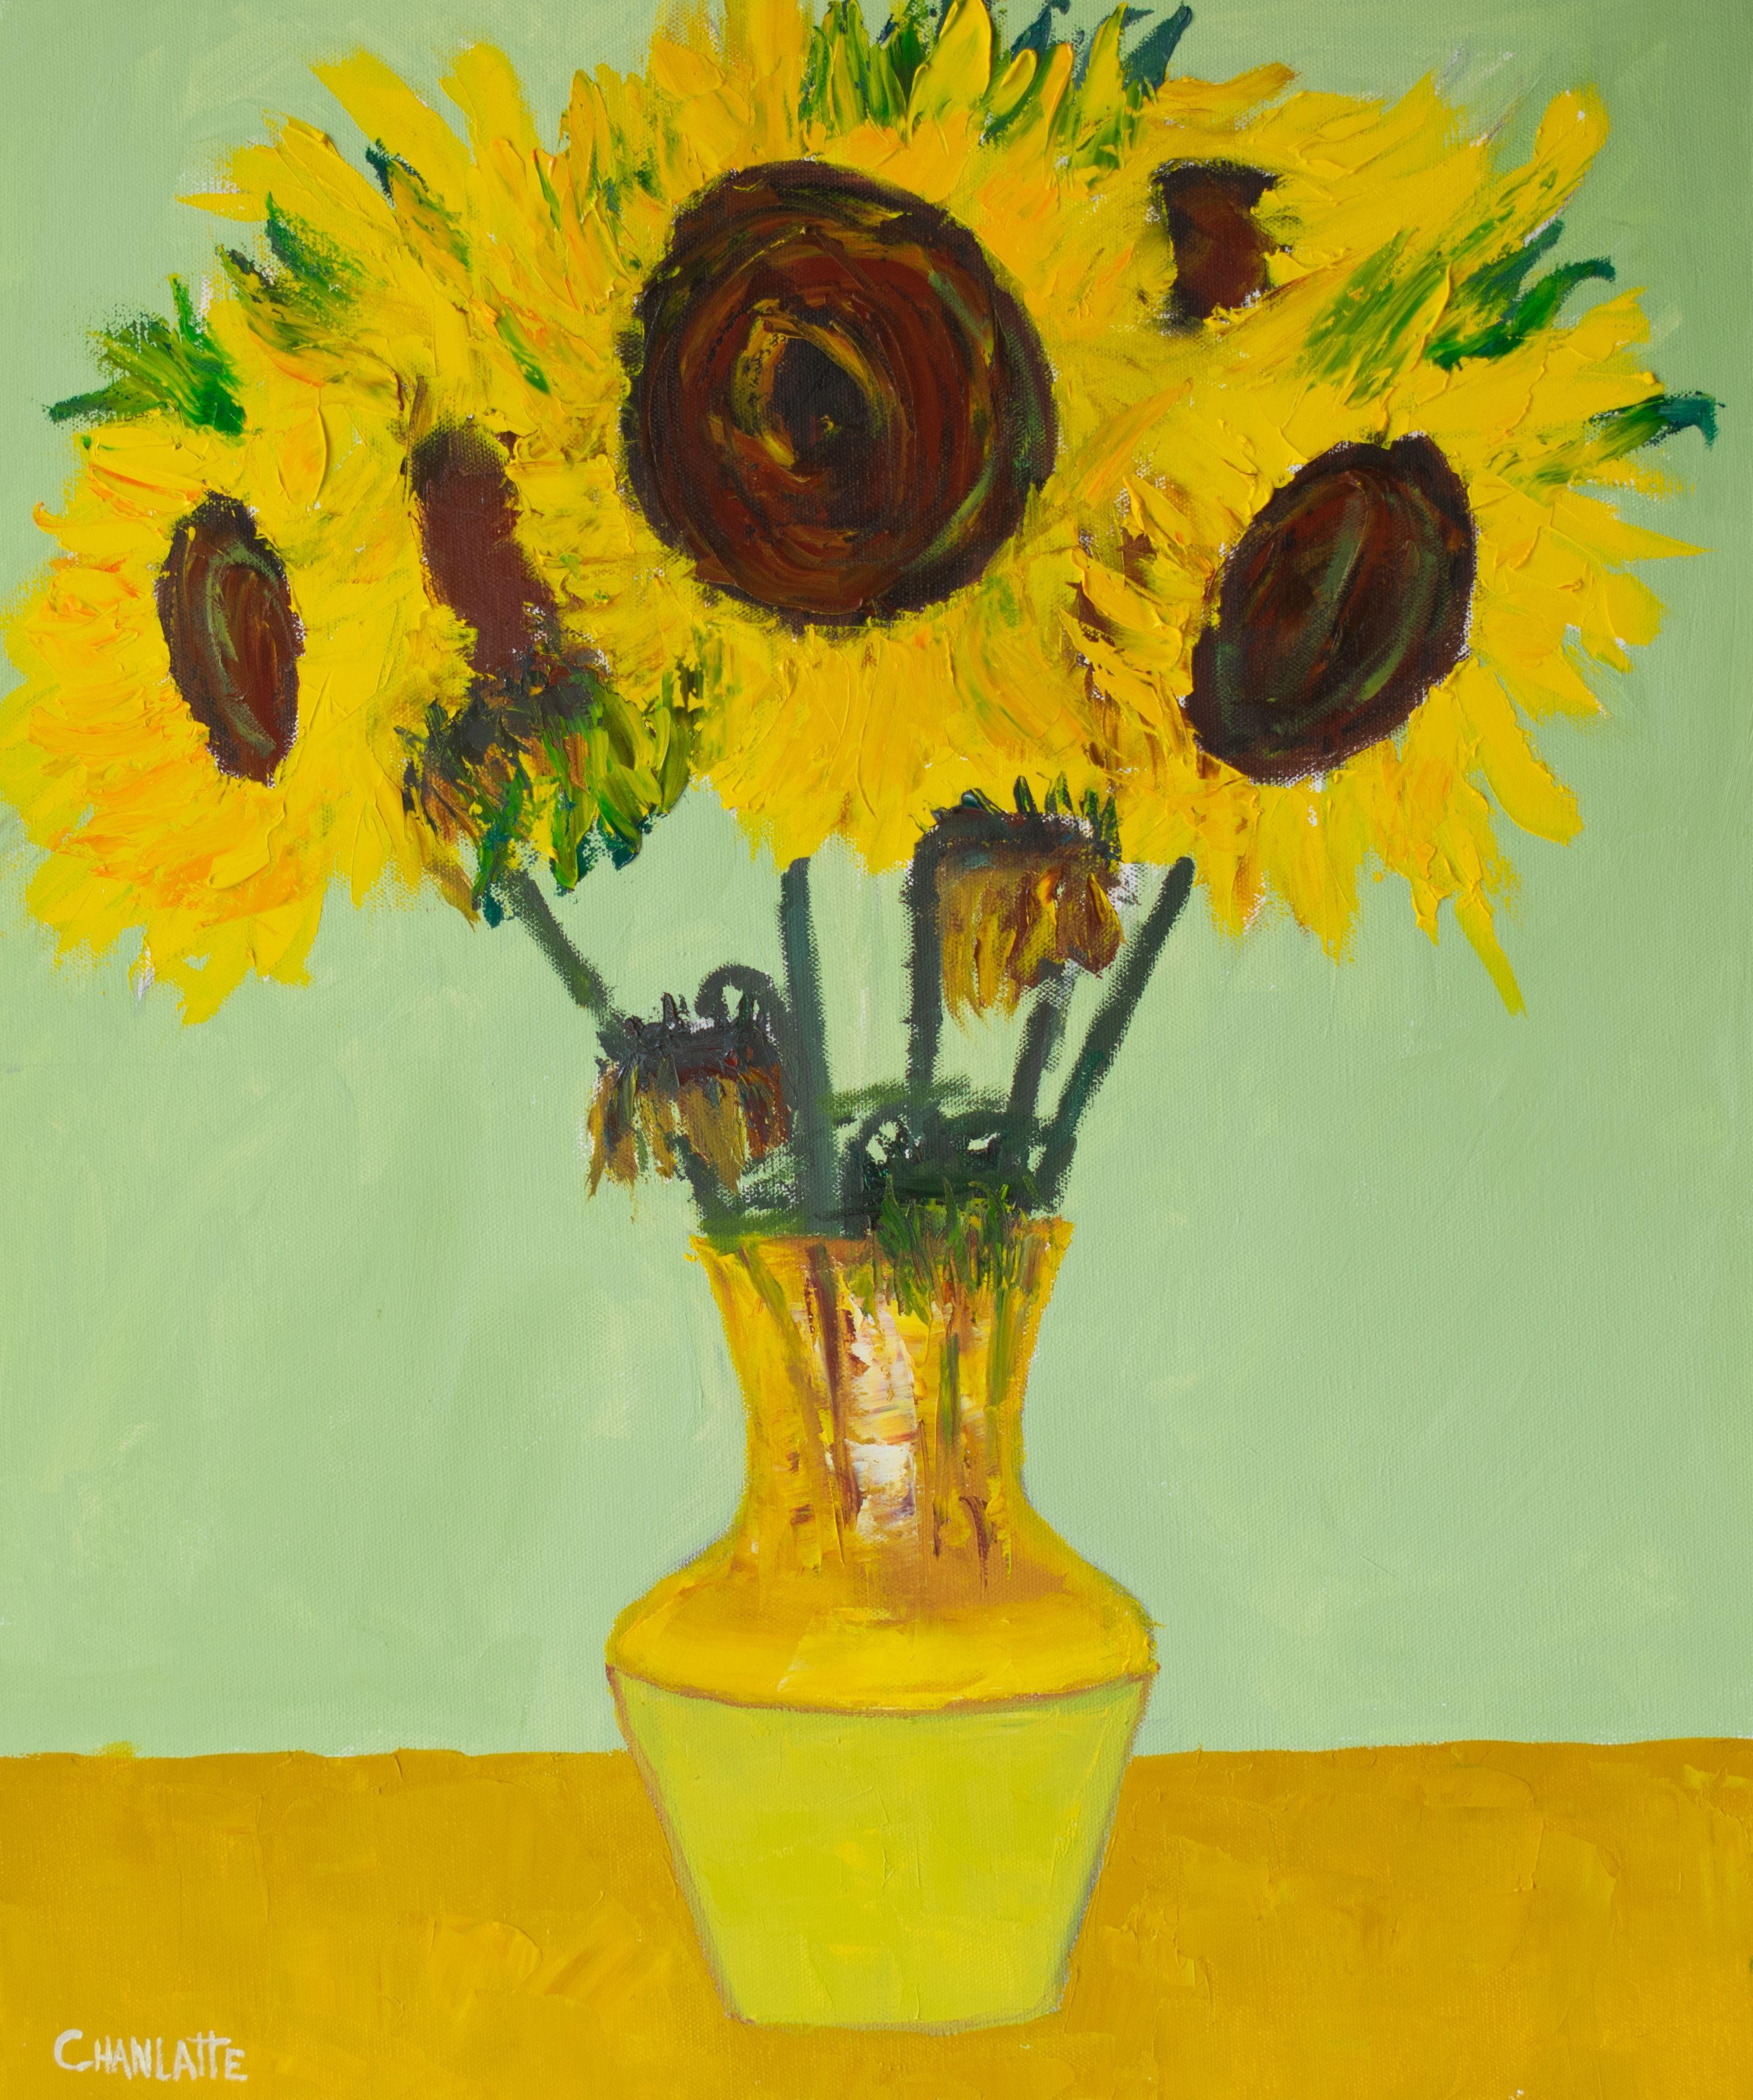 Marino Chanlatte Abstract Painting - Sunflower 5, Painting, Oil on Canvas